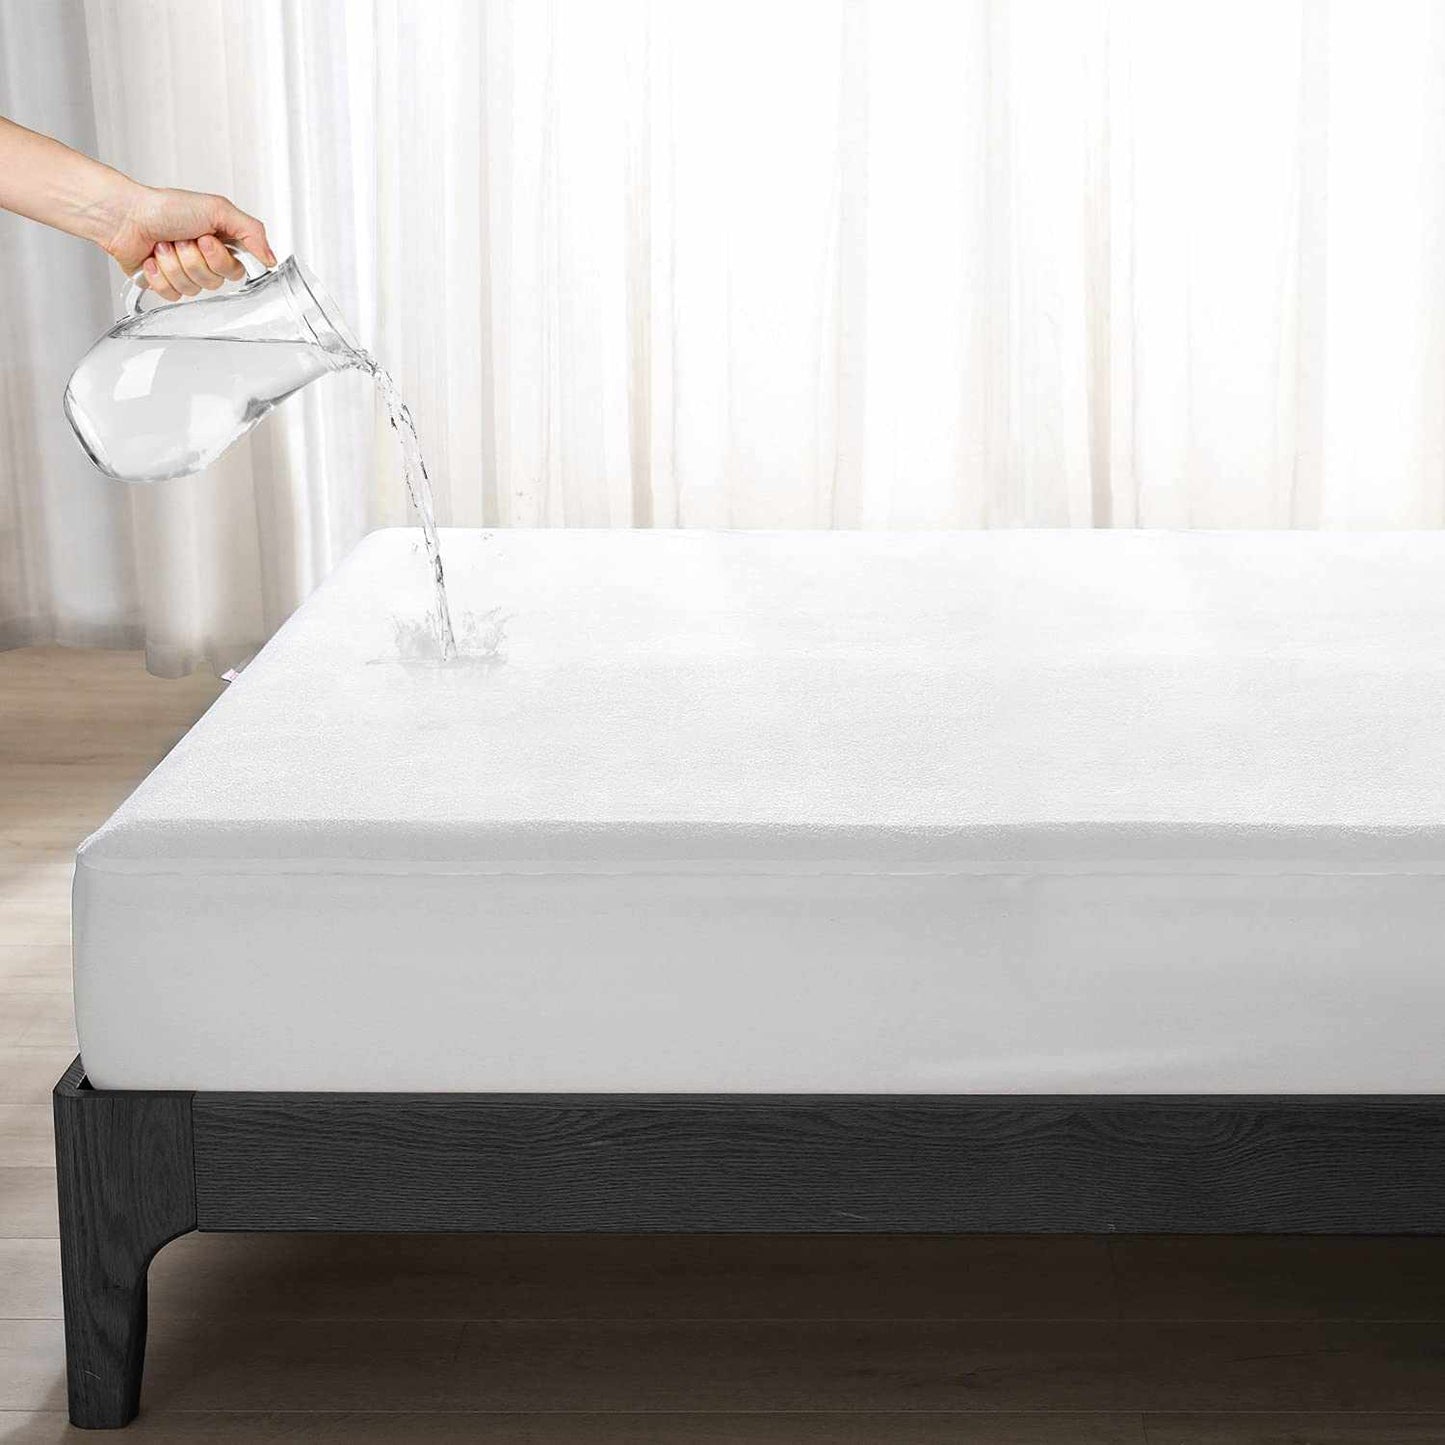 White Terry Cotton Soft & Breathable Water Proof Mattress Protector Cover for Single Bed - 36"x72"  - (MP-WHITE-SB)